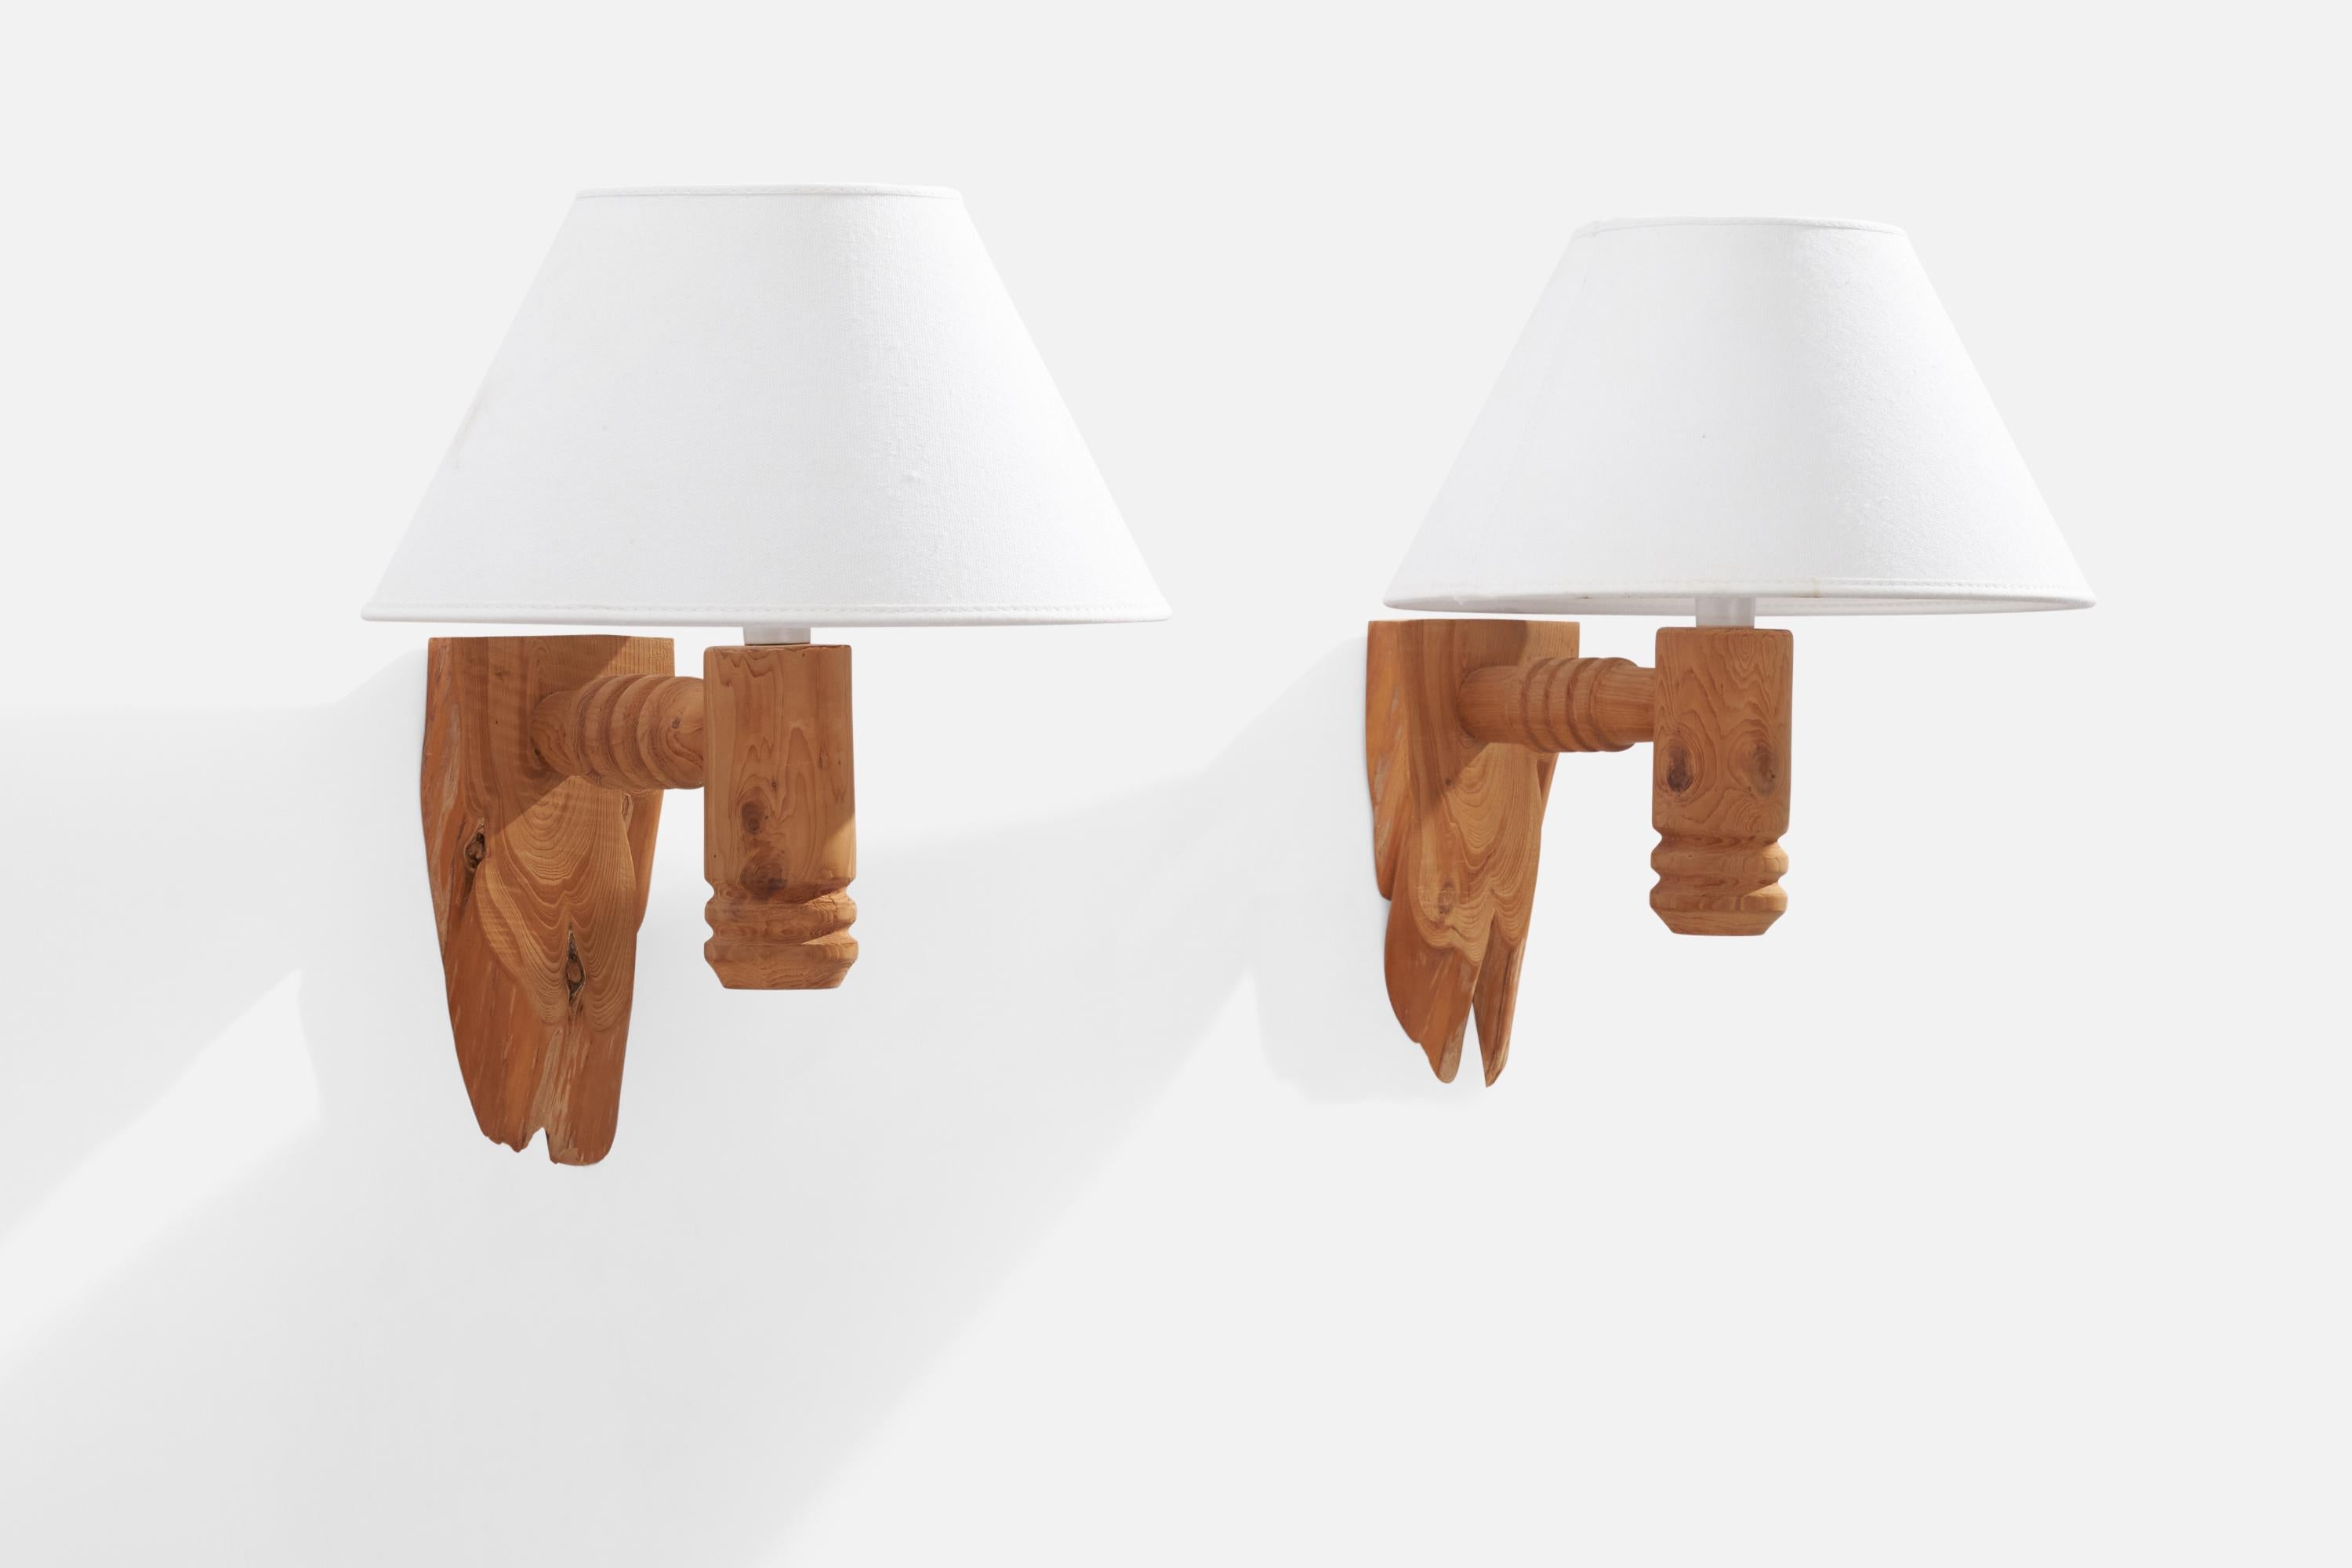 A pair of freeform pine and white fabric wall lights designed and produced in Sweden, 1970s.

Overall Dimensions (inches): 11.75” H x 8” W x 9.25” D
Back Plate Dimensions (inches): N/A
Bulb Specifications: E-14 Bulb
Number of Sockets: 2
All lighting